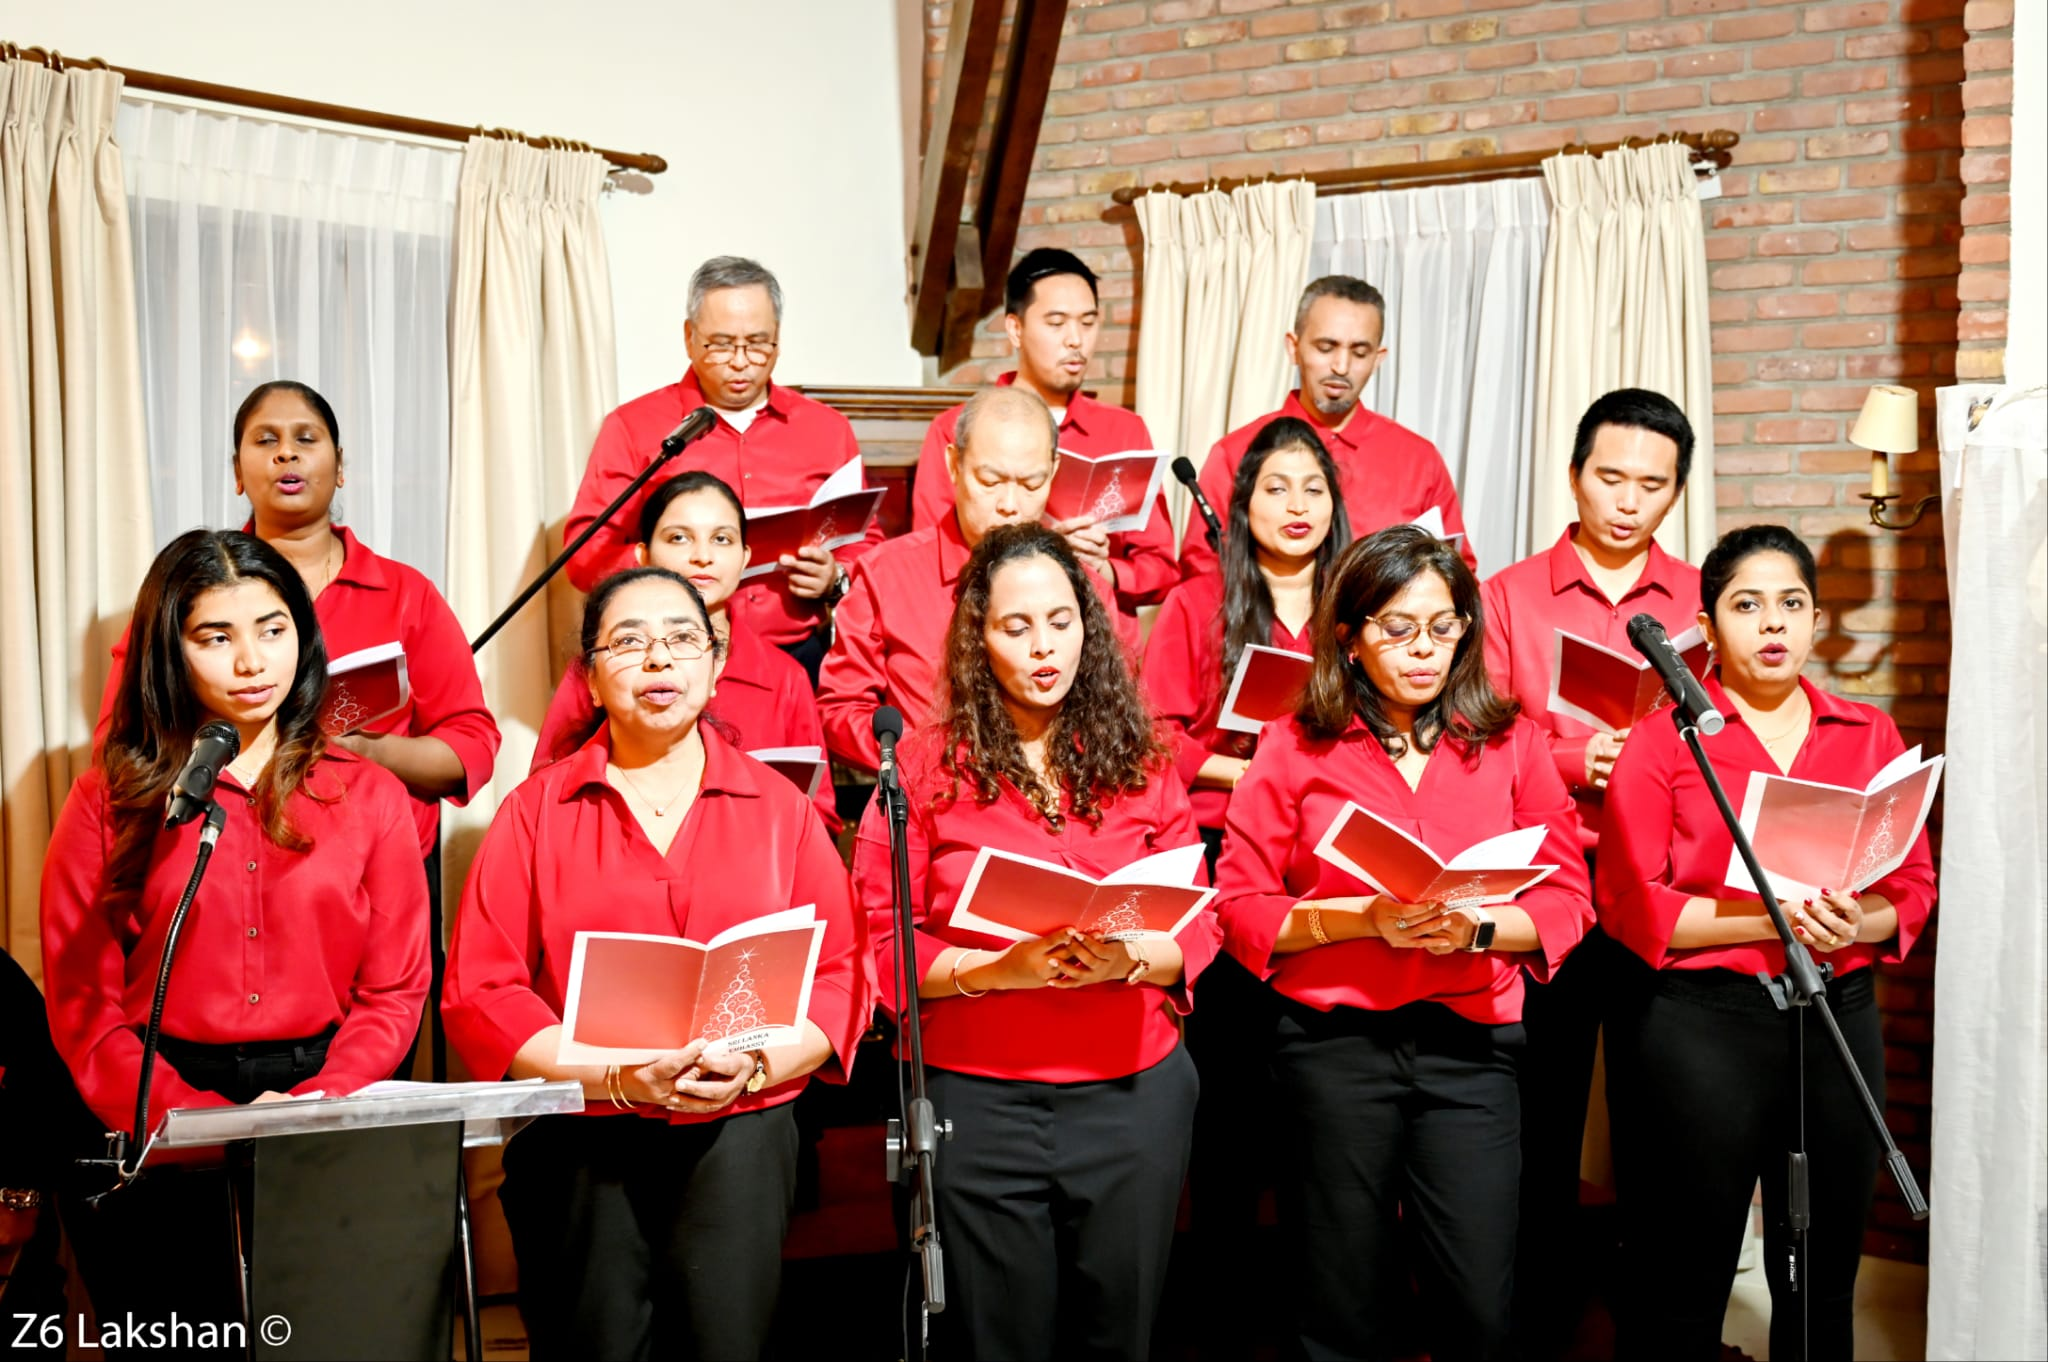 Sri Lankan Embassy in Brussels Rings in Christmas Spirit with Festive Carol Event